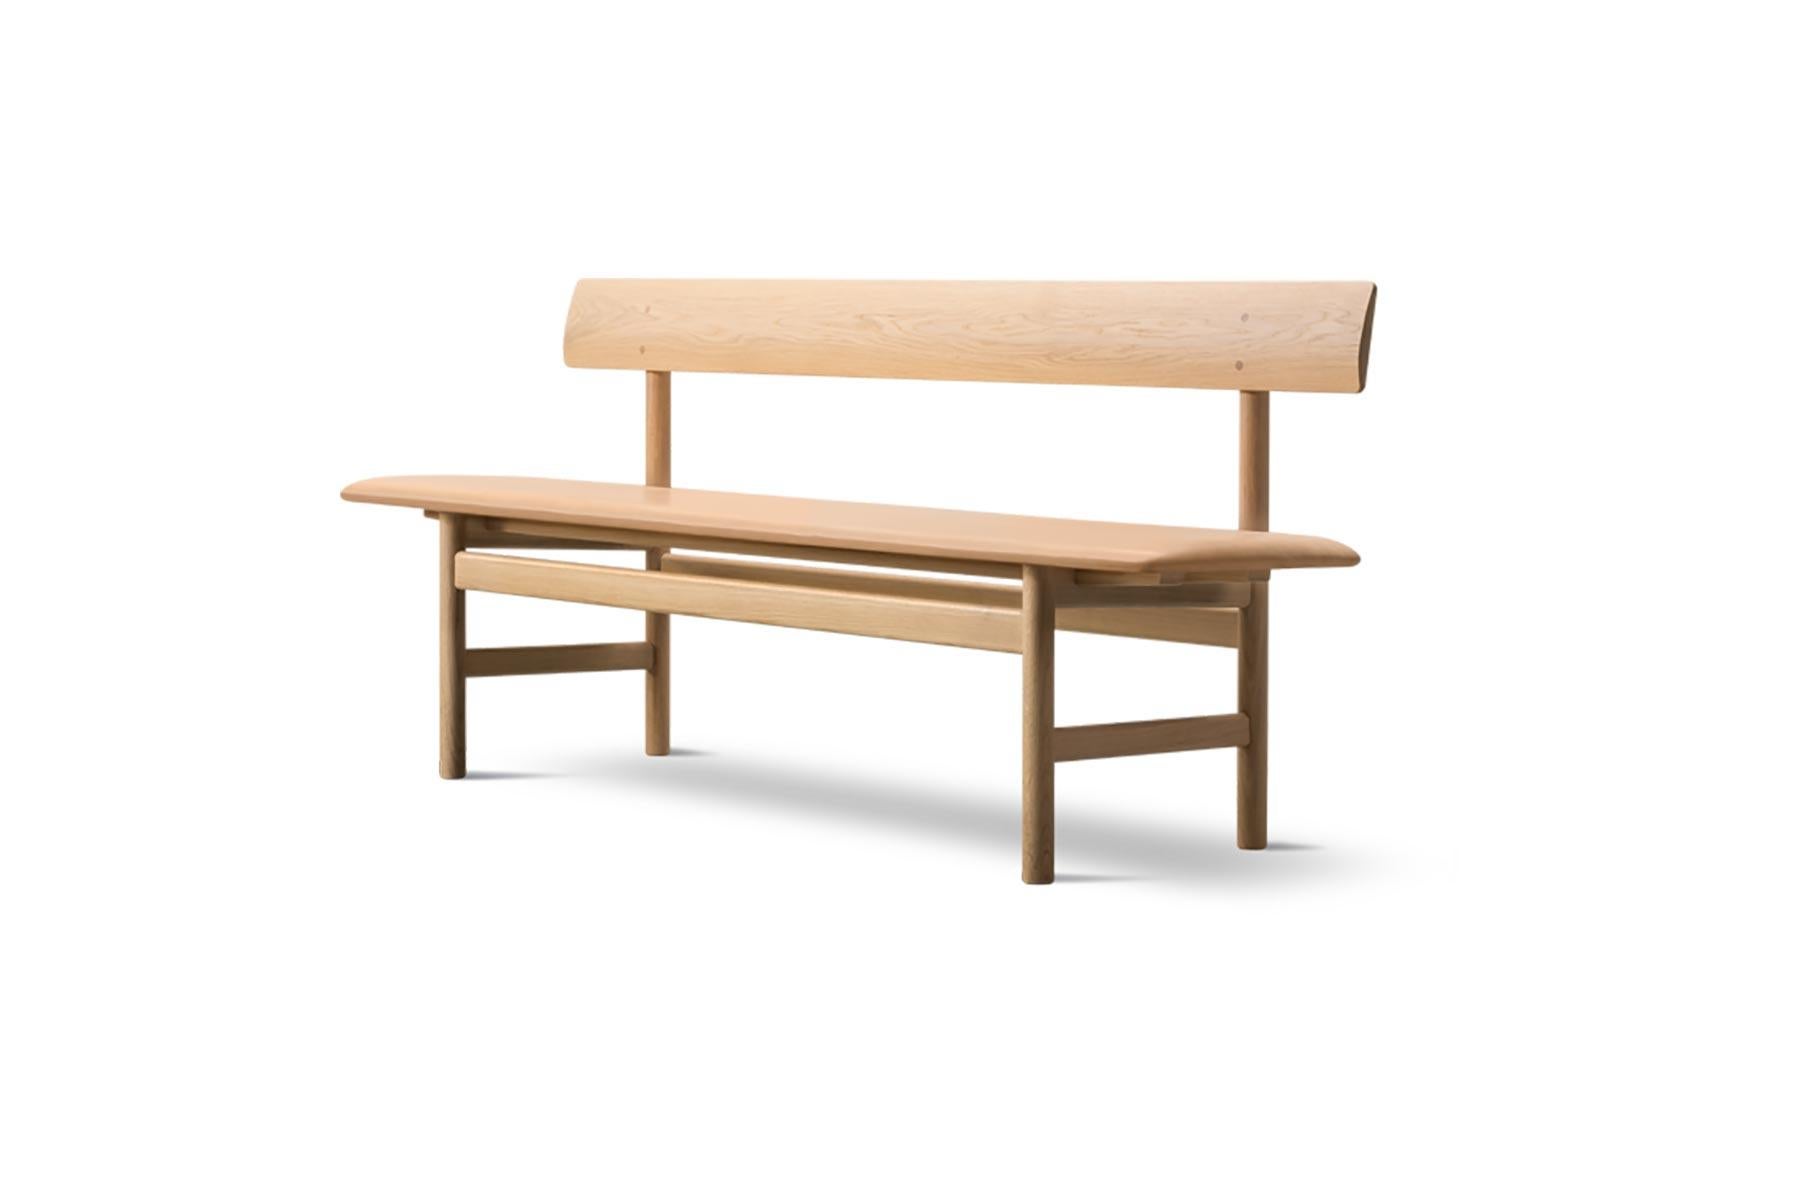 Børge Mogensen designed this solid wood dining bench in 1956. With its robust simplicity the bench is an ideal example of Mogensen’s lifelong drive for a purified shape.

Inquire for leather or fabric upholstery options.

